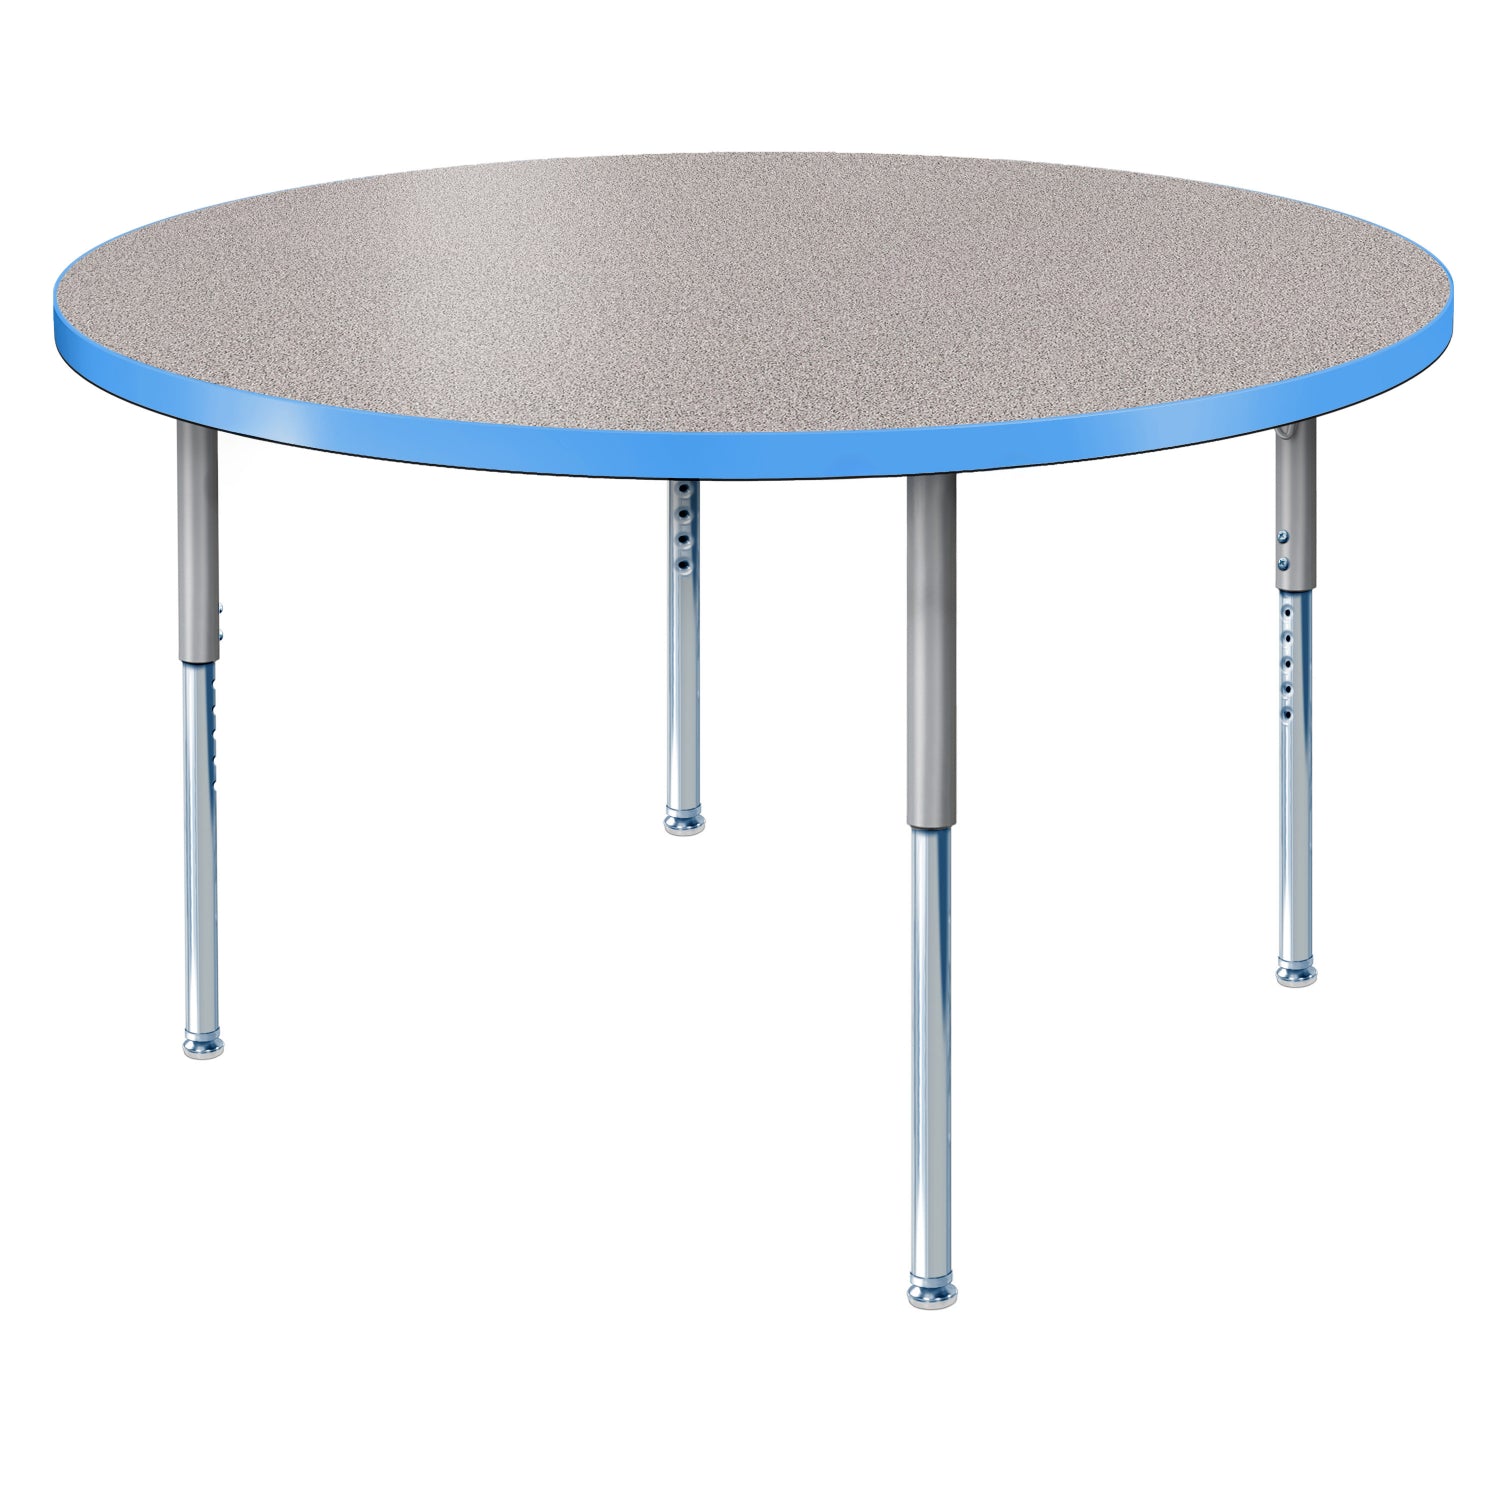 Modern Classic Series 60" Circle Activity Table with High Pressure Laminate Top, Adjustable Height Legs